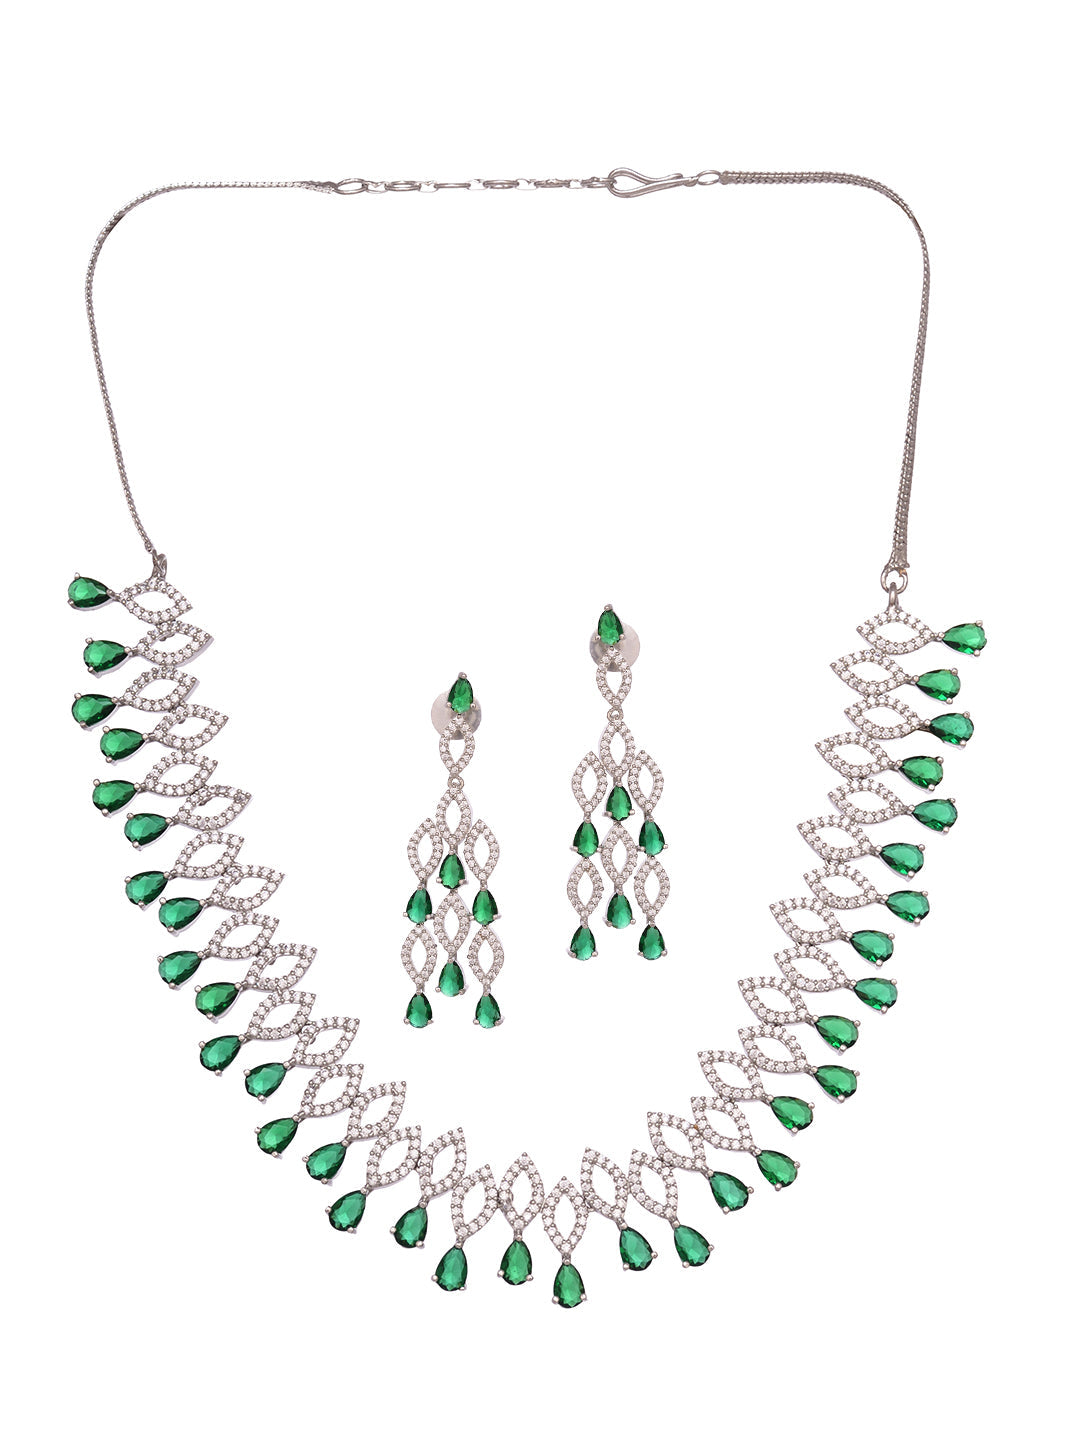 Silver Plated Green AD studded Chandelier Necklace Jewellery Set, zaveri pearls, sale price rs, sale price, sale gold plated, sale gold, sale, rubans, ring, regular price, priyassi jewellery,